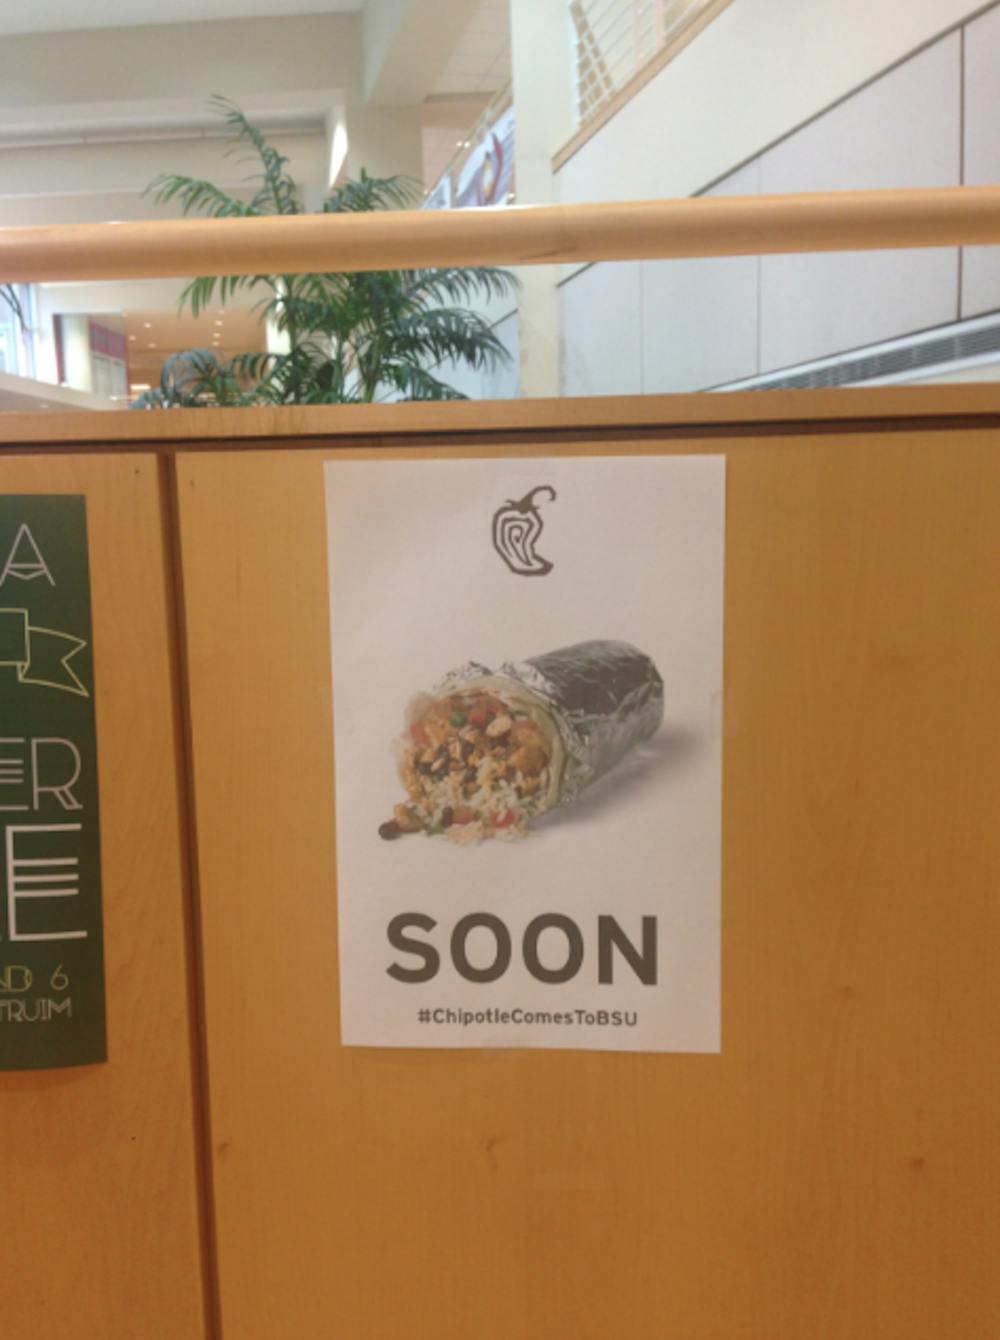 <p>Chipotle does not have any plans to come to Muncie in the near future. There is a sign in the Atrium staircase with a photo of a Chipotle burrito saying, "Soon" and the hashtag #ChipotleComesToBSU. <em>DN PHOTO BREANNA DAUGHERTY</em></p>